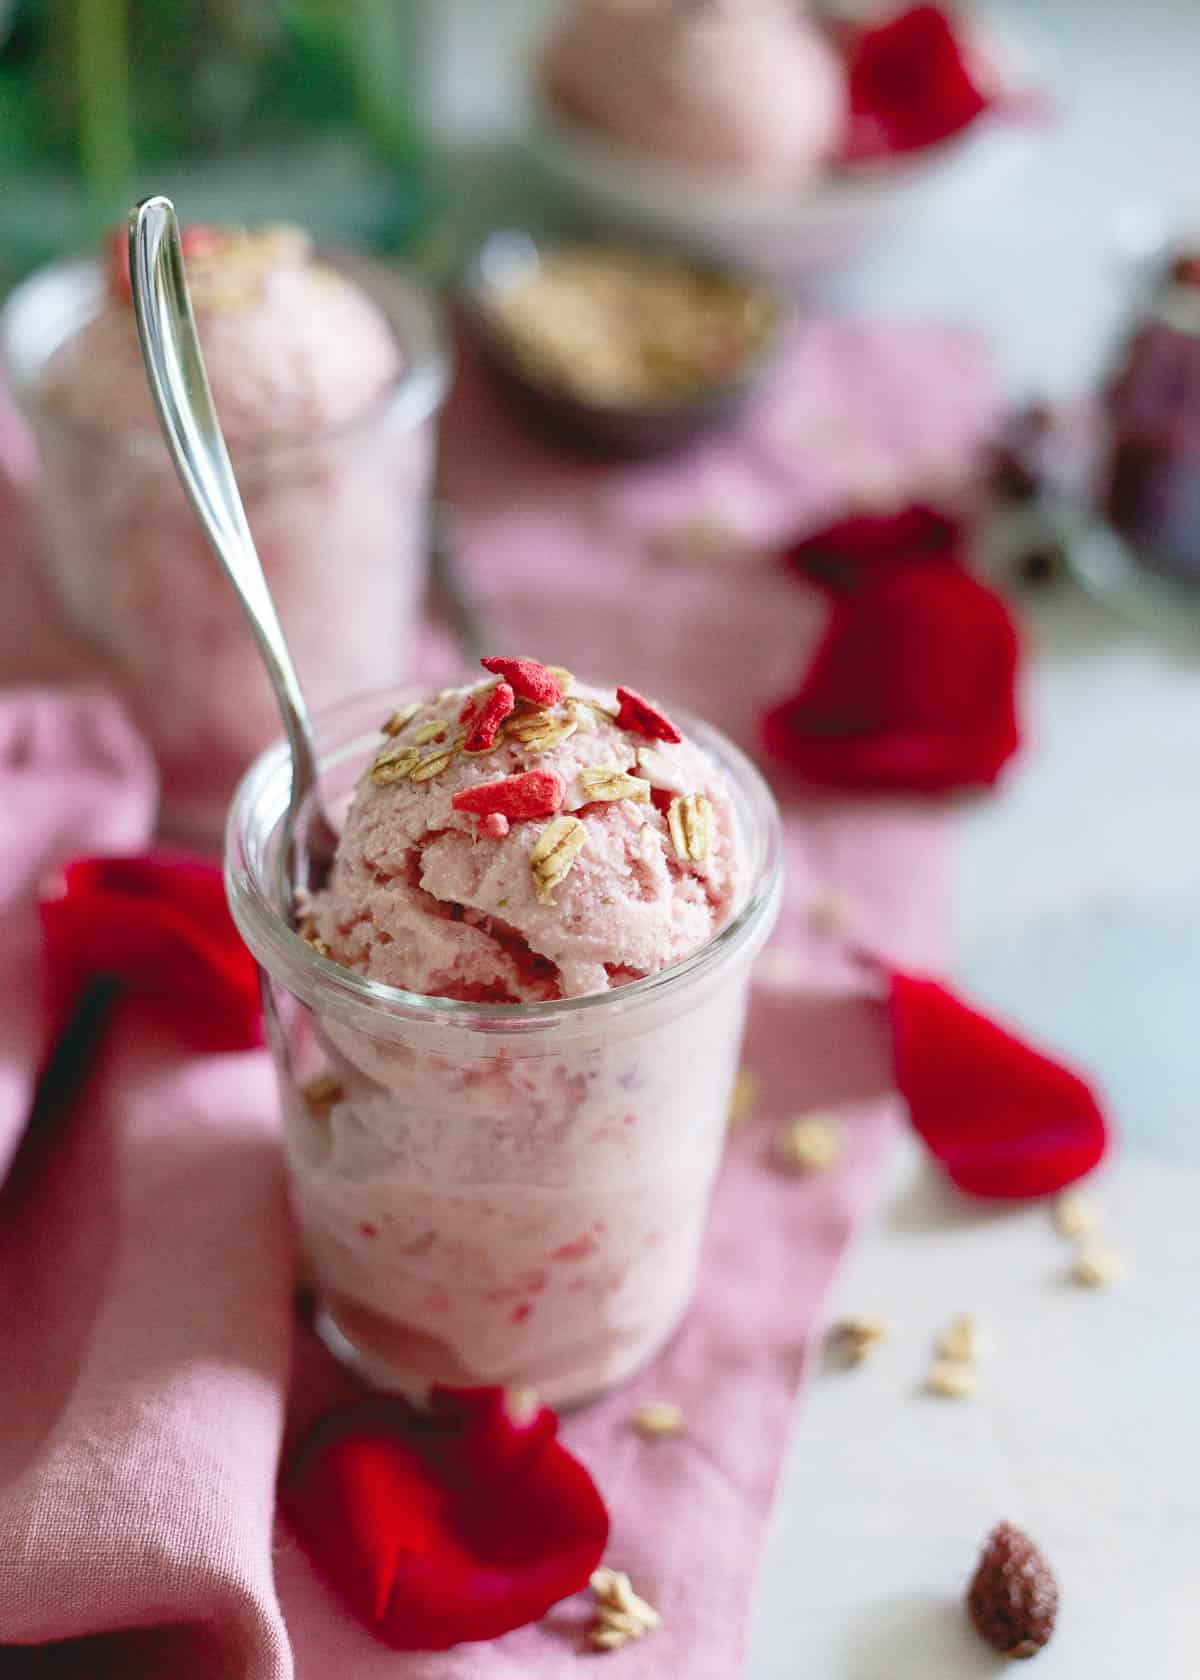 This rosehip ice cream is made with half milk, half Greek yogurt for the perfect balance of creaminess and tang. It's filled with strawberries, granola and infused with a subtle rosehip flavor making it a great spring dessert.